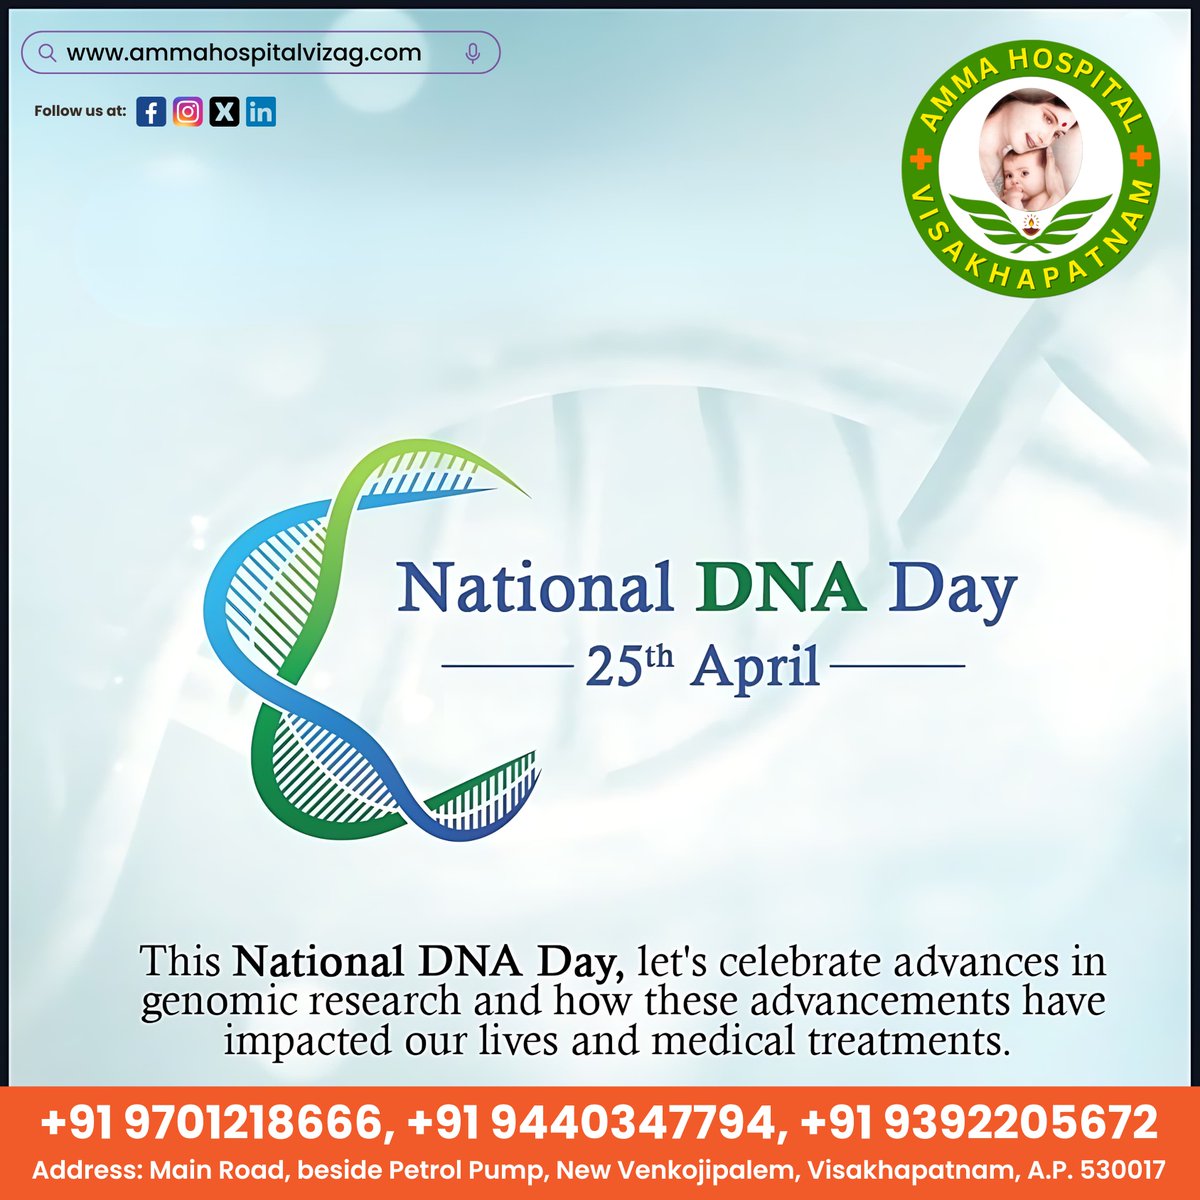 Unlocking the mysteries of life, strand by strand. Happy National DNA Day from Amma Hospital. 🧬

Contacts : +91 9515888591 | +91 9392051992 

#AmmaHospital #DNAsequencing #Healthcare #Discoveries #Innovation #GeneticResearch #MedicalAdvancements #Science #Biology